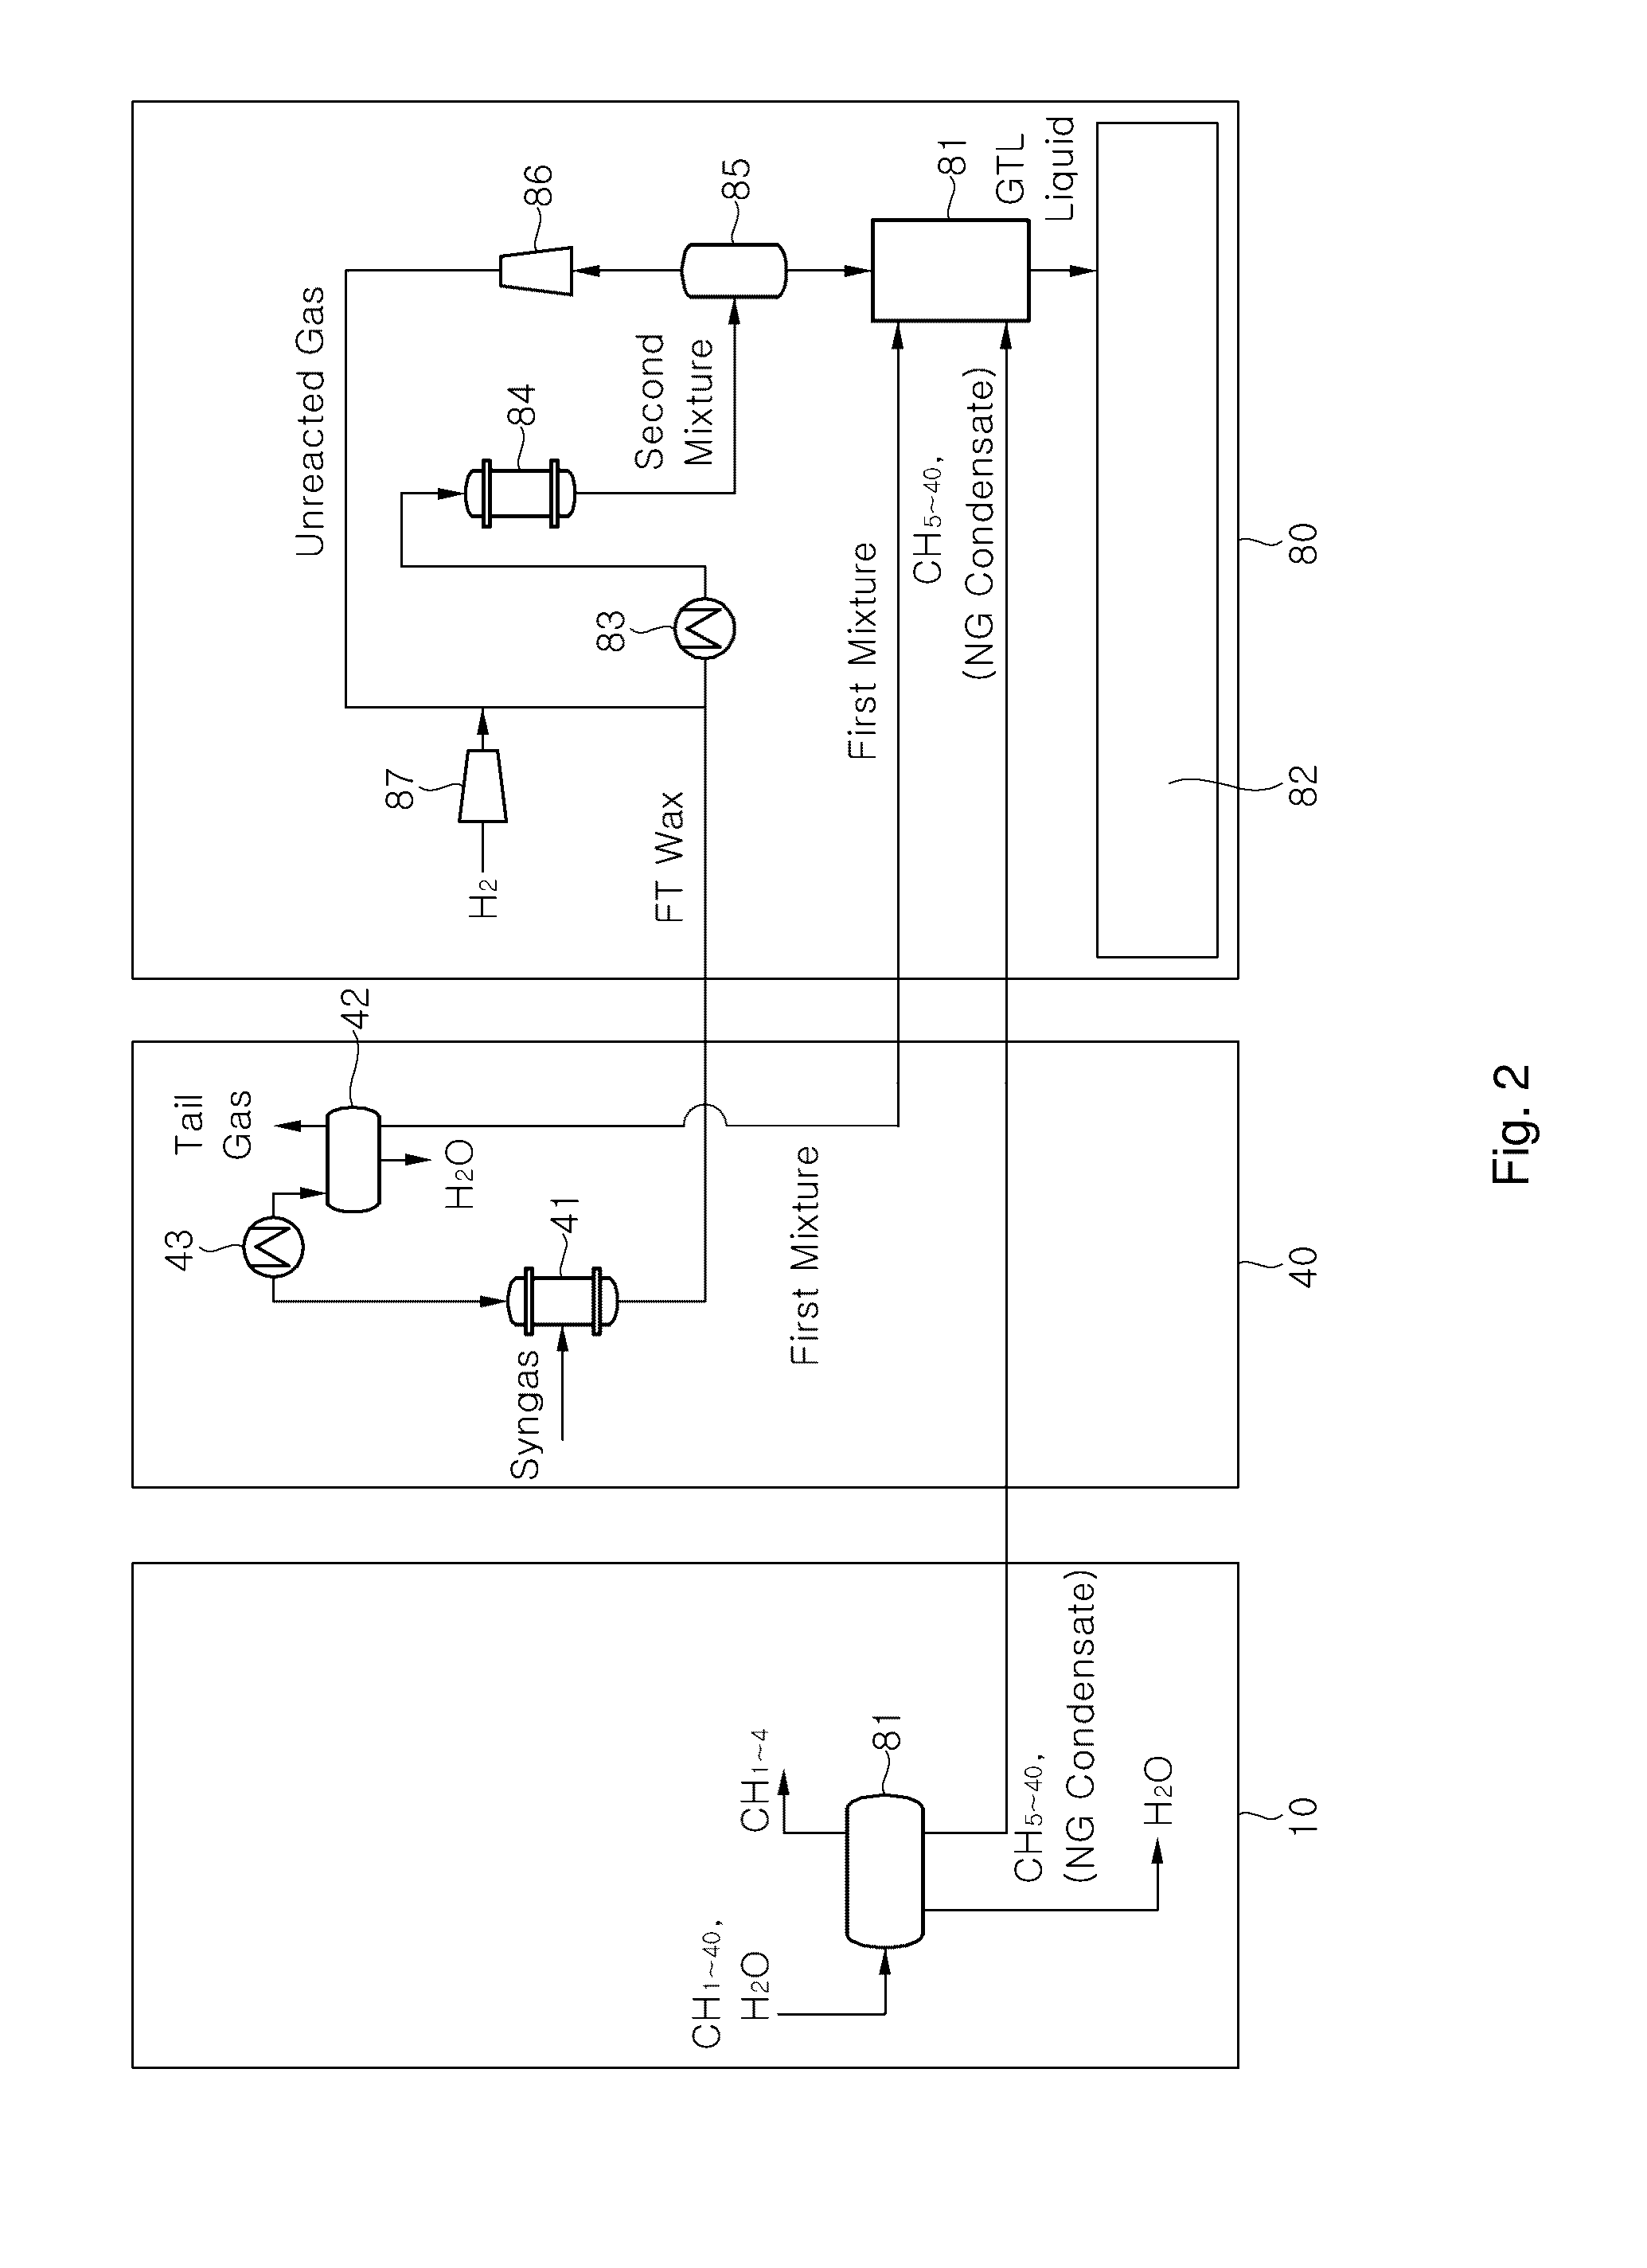 Ft gtl apparatus and method for producing single synthetic crude oil